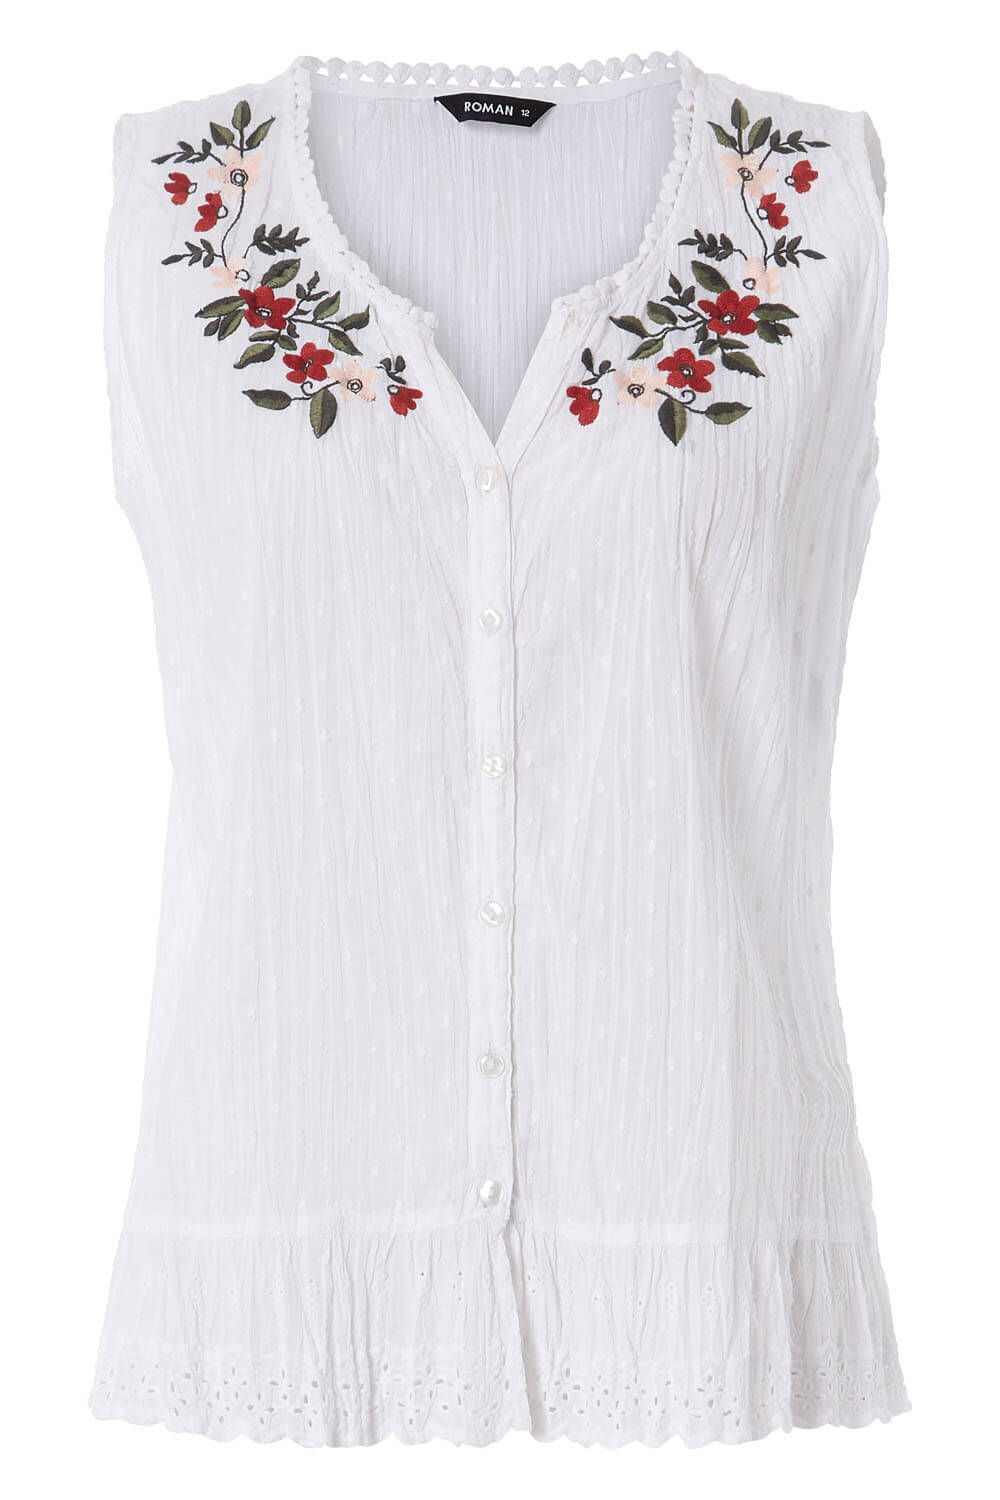 Ivory  Floral Embroidered Cotton Crinkle Blouse, Image 5 of 5